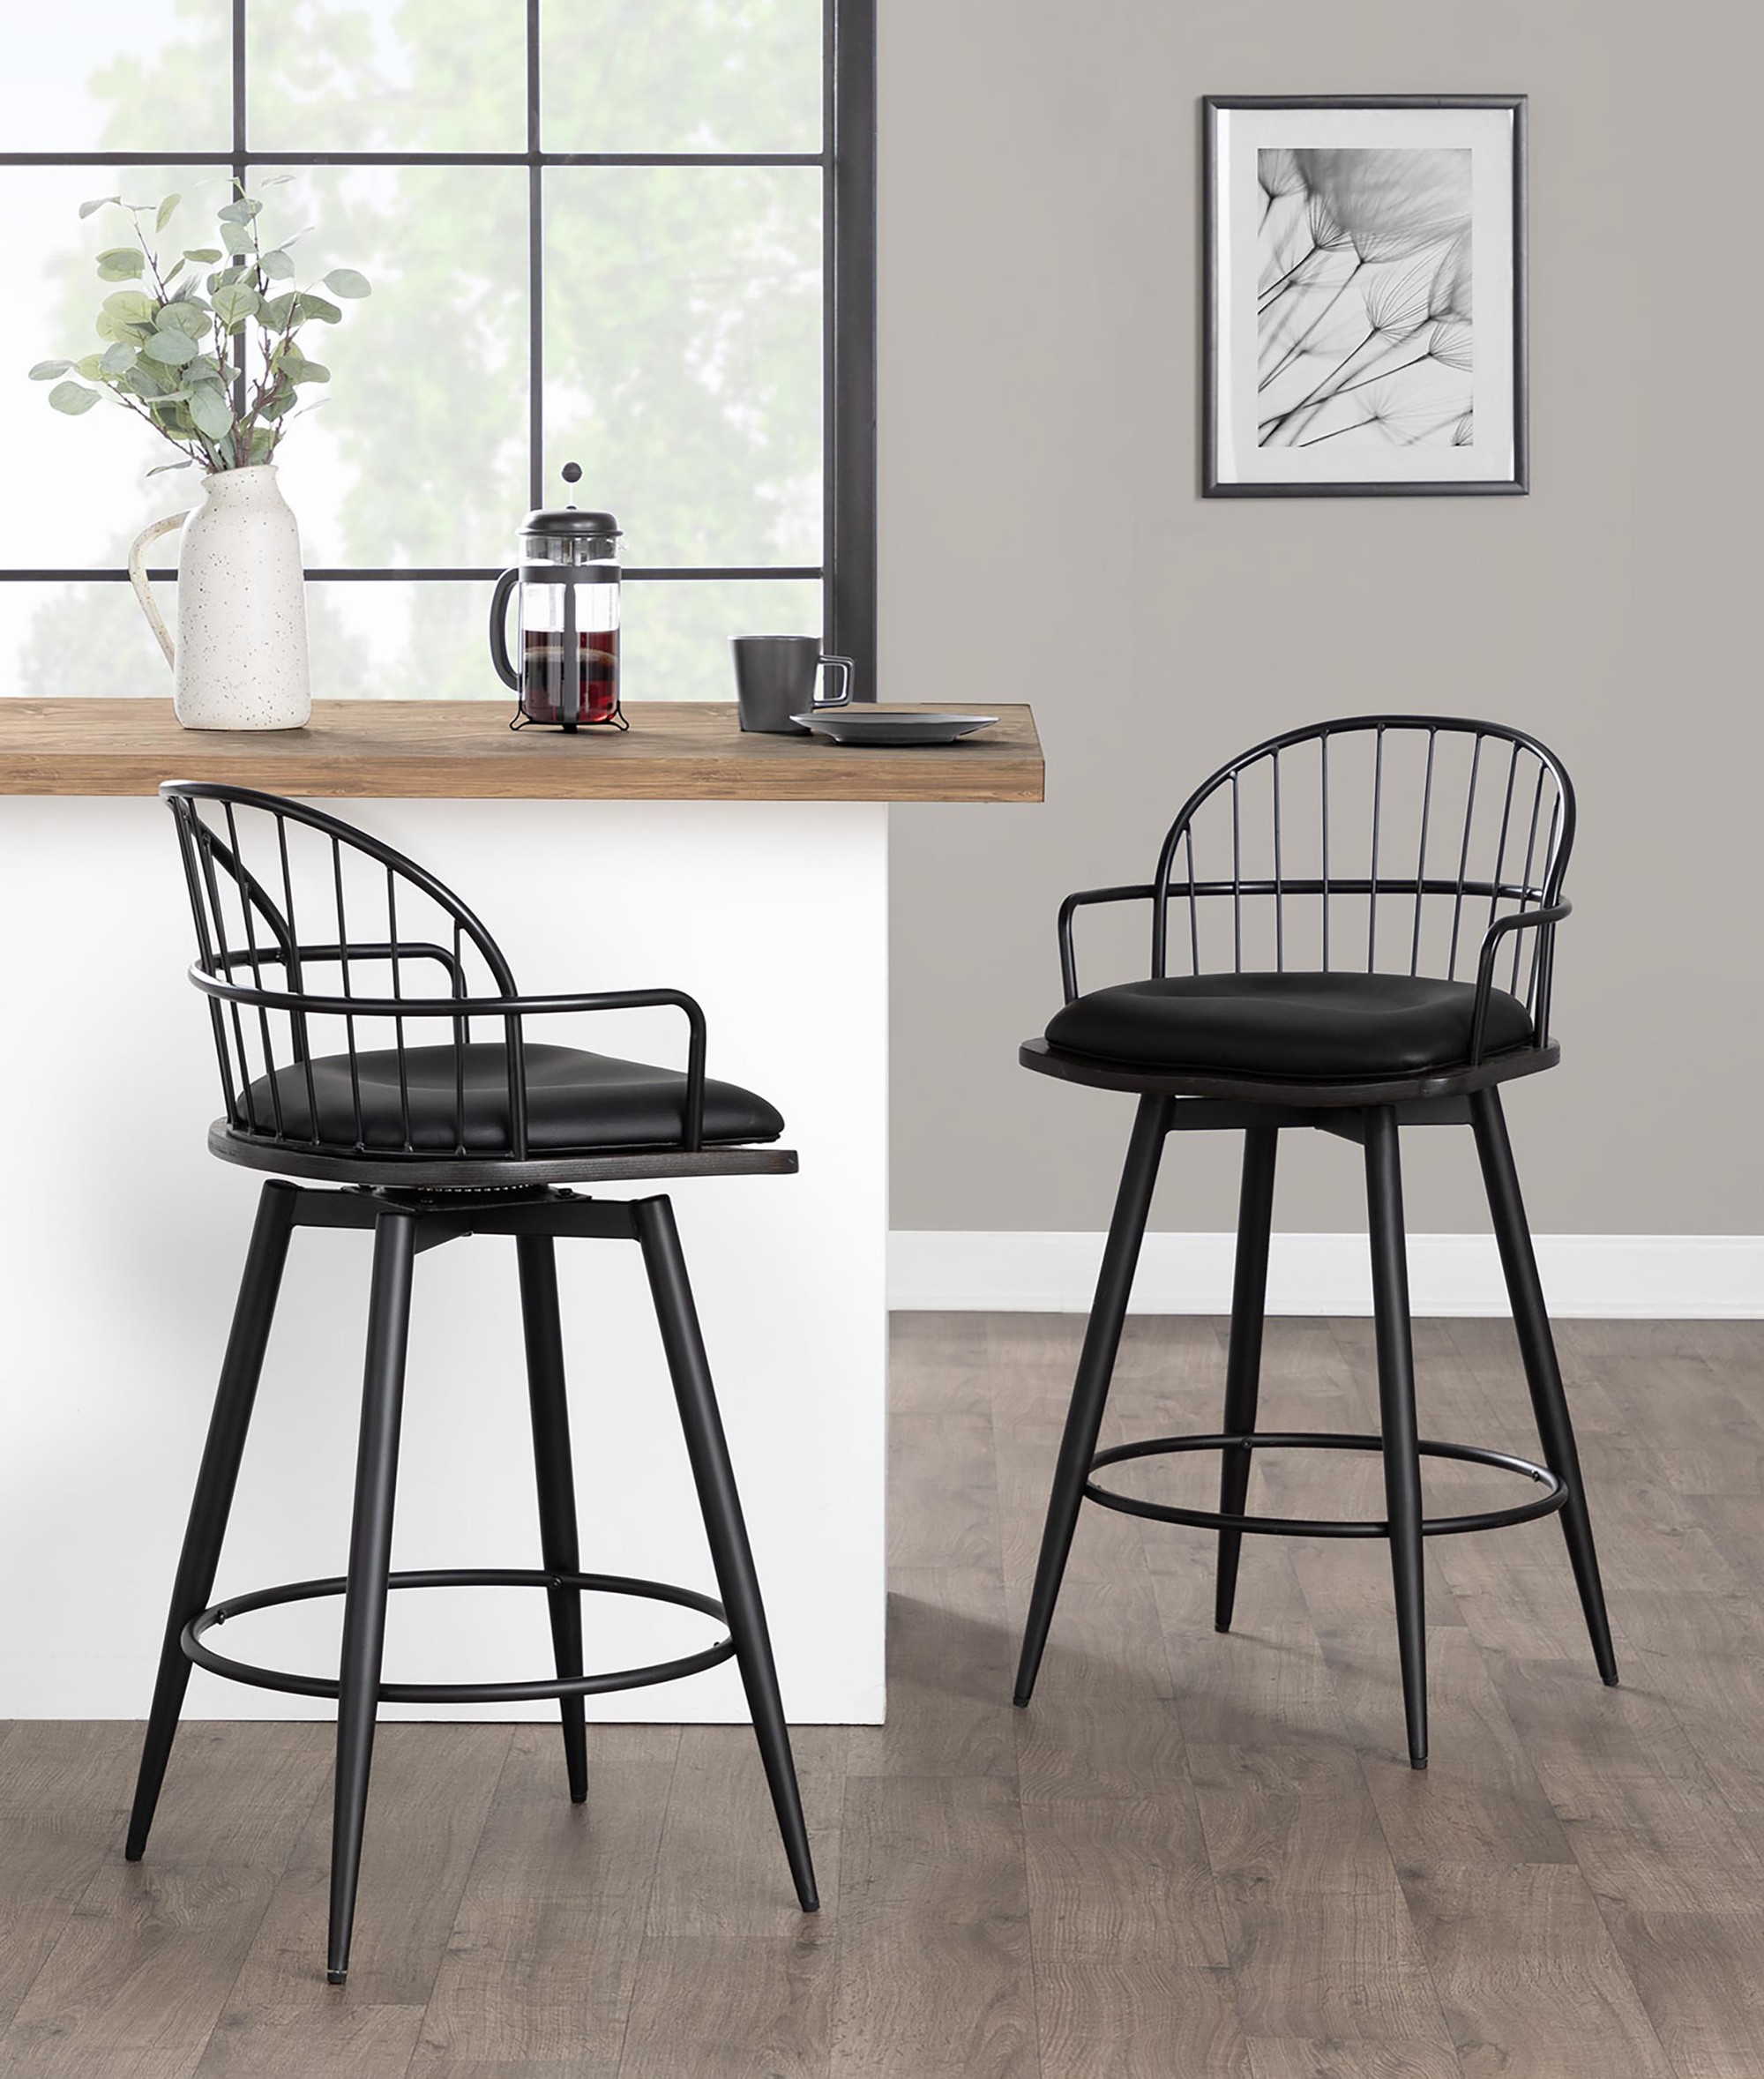 Riley 26" Fixed-height Counter Stool With Arms - Set Of 2